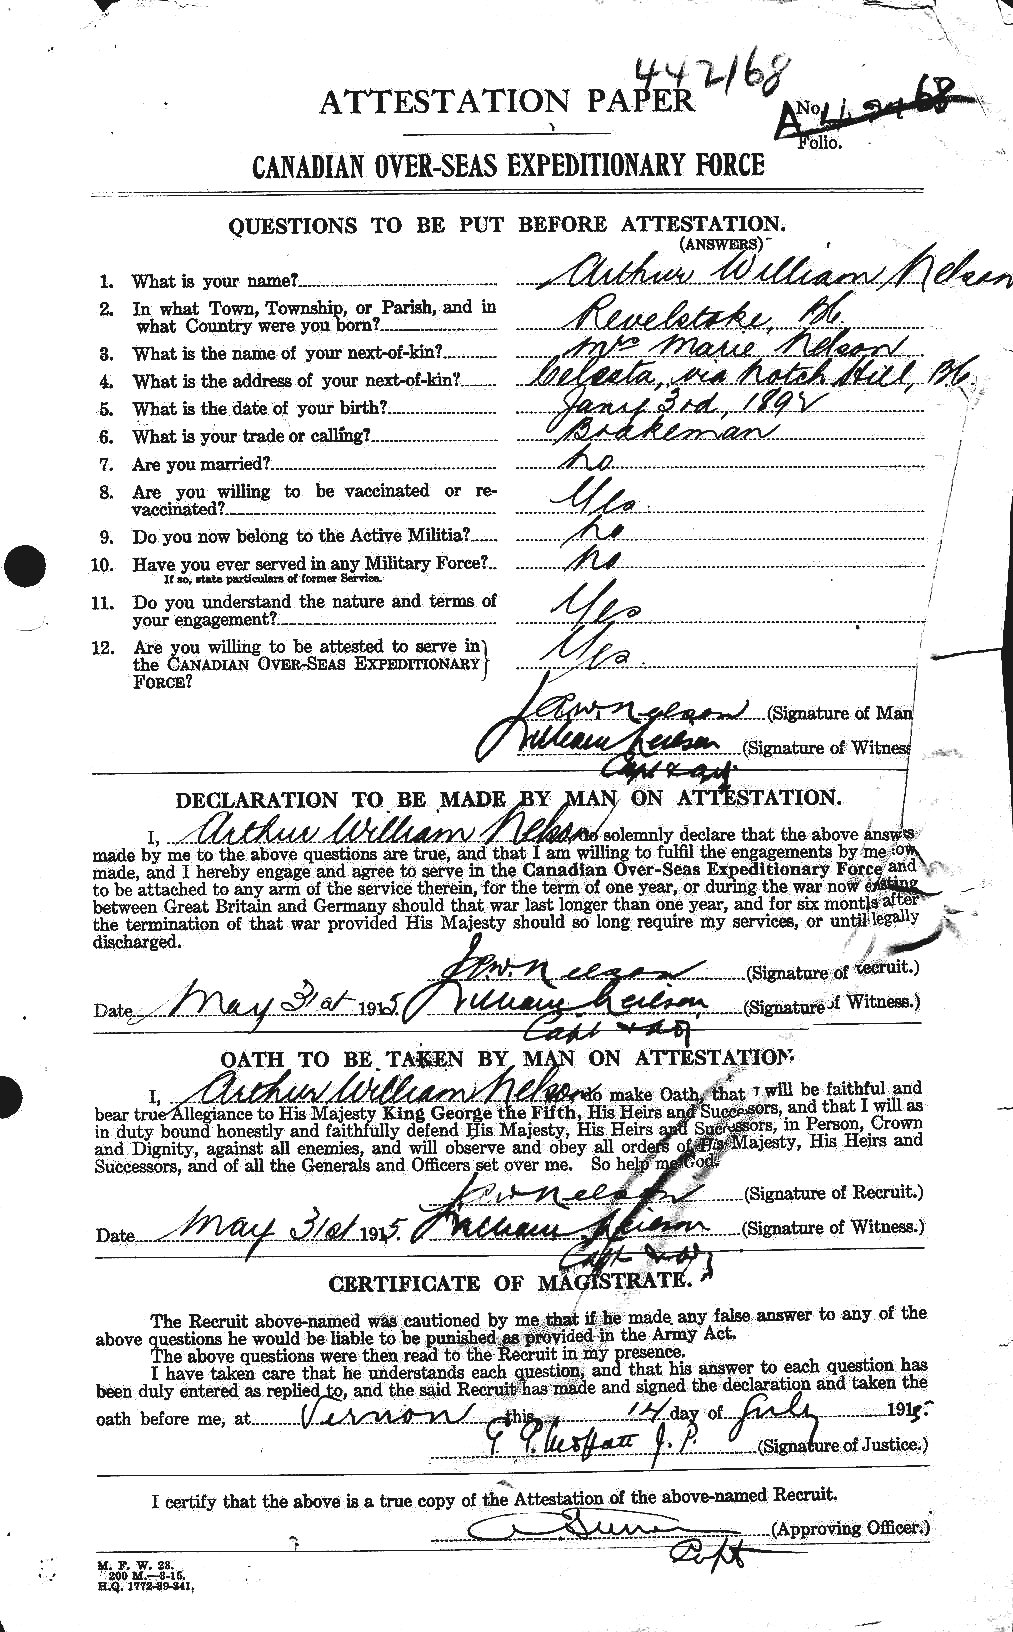 Personnel Records of the First World War - CEF 547106a